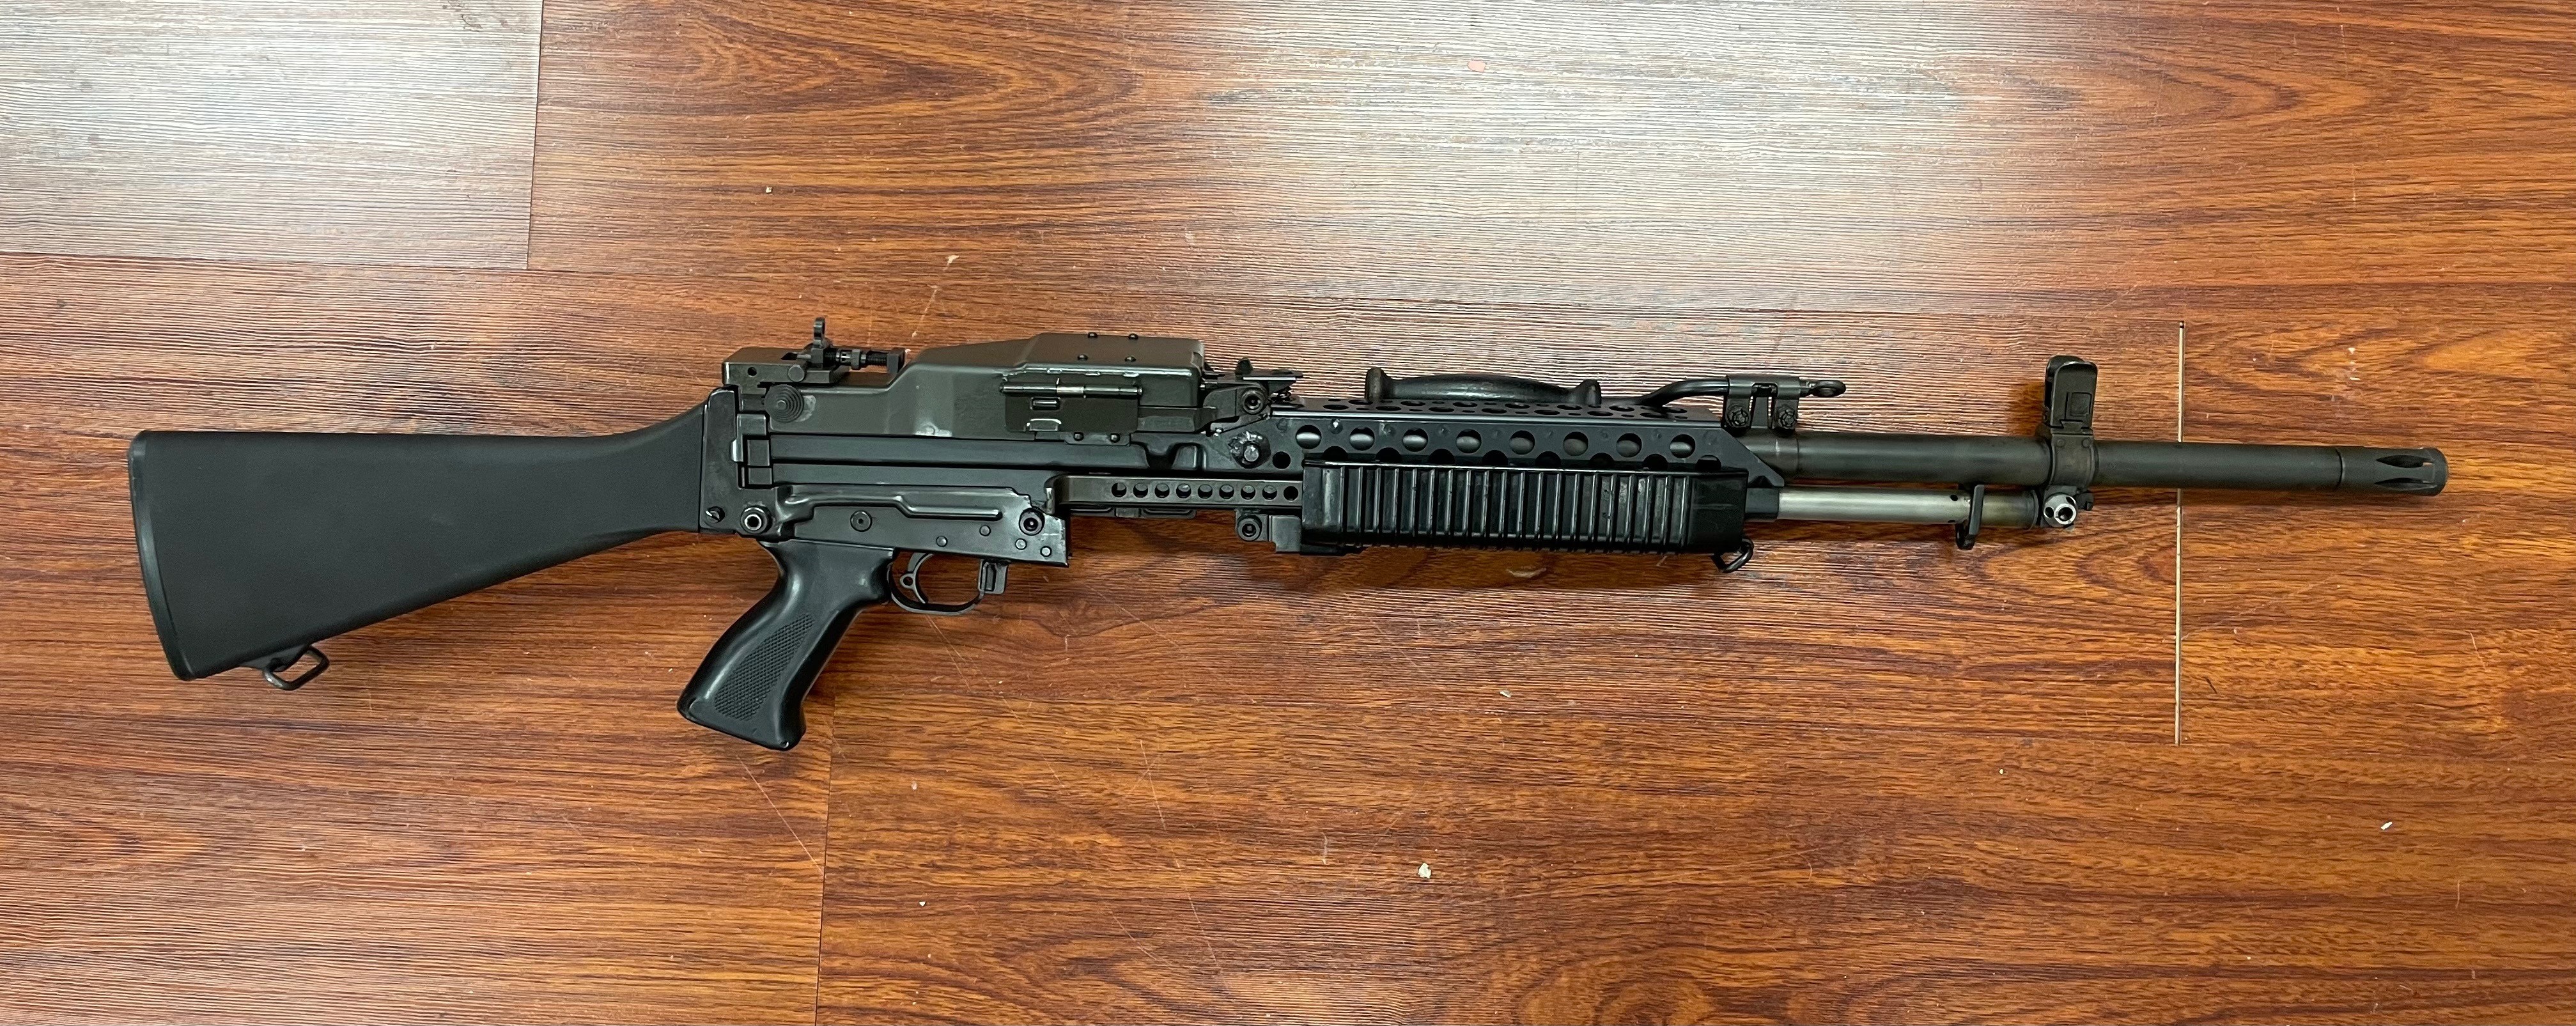 **SOLD** Knights Armament Stoner 63A Beltfed Machinegun 5.56MM - Click Image to Close